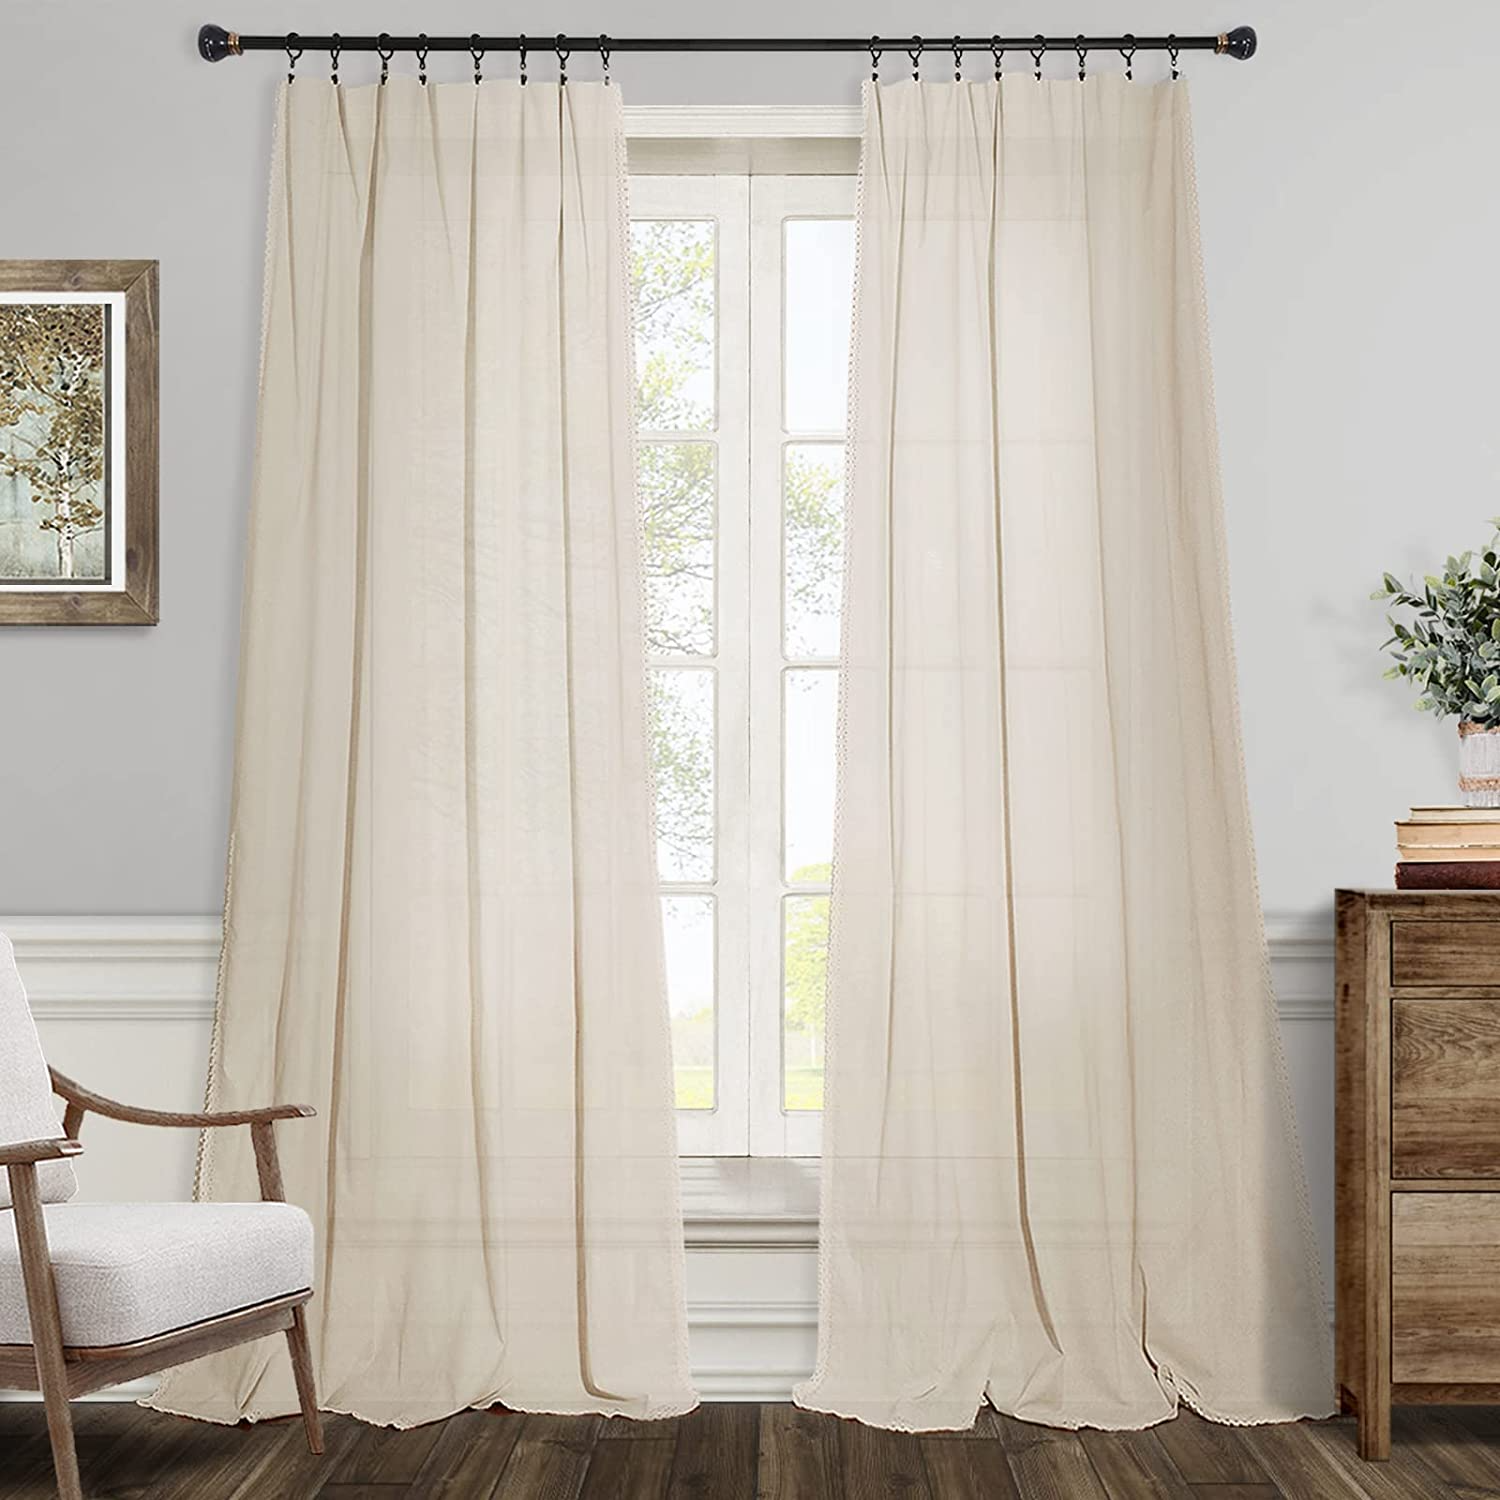 11 Modern Farmhouse Bedroom Curtains from Amazon - Fouts Lane